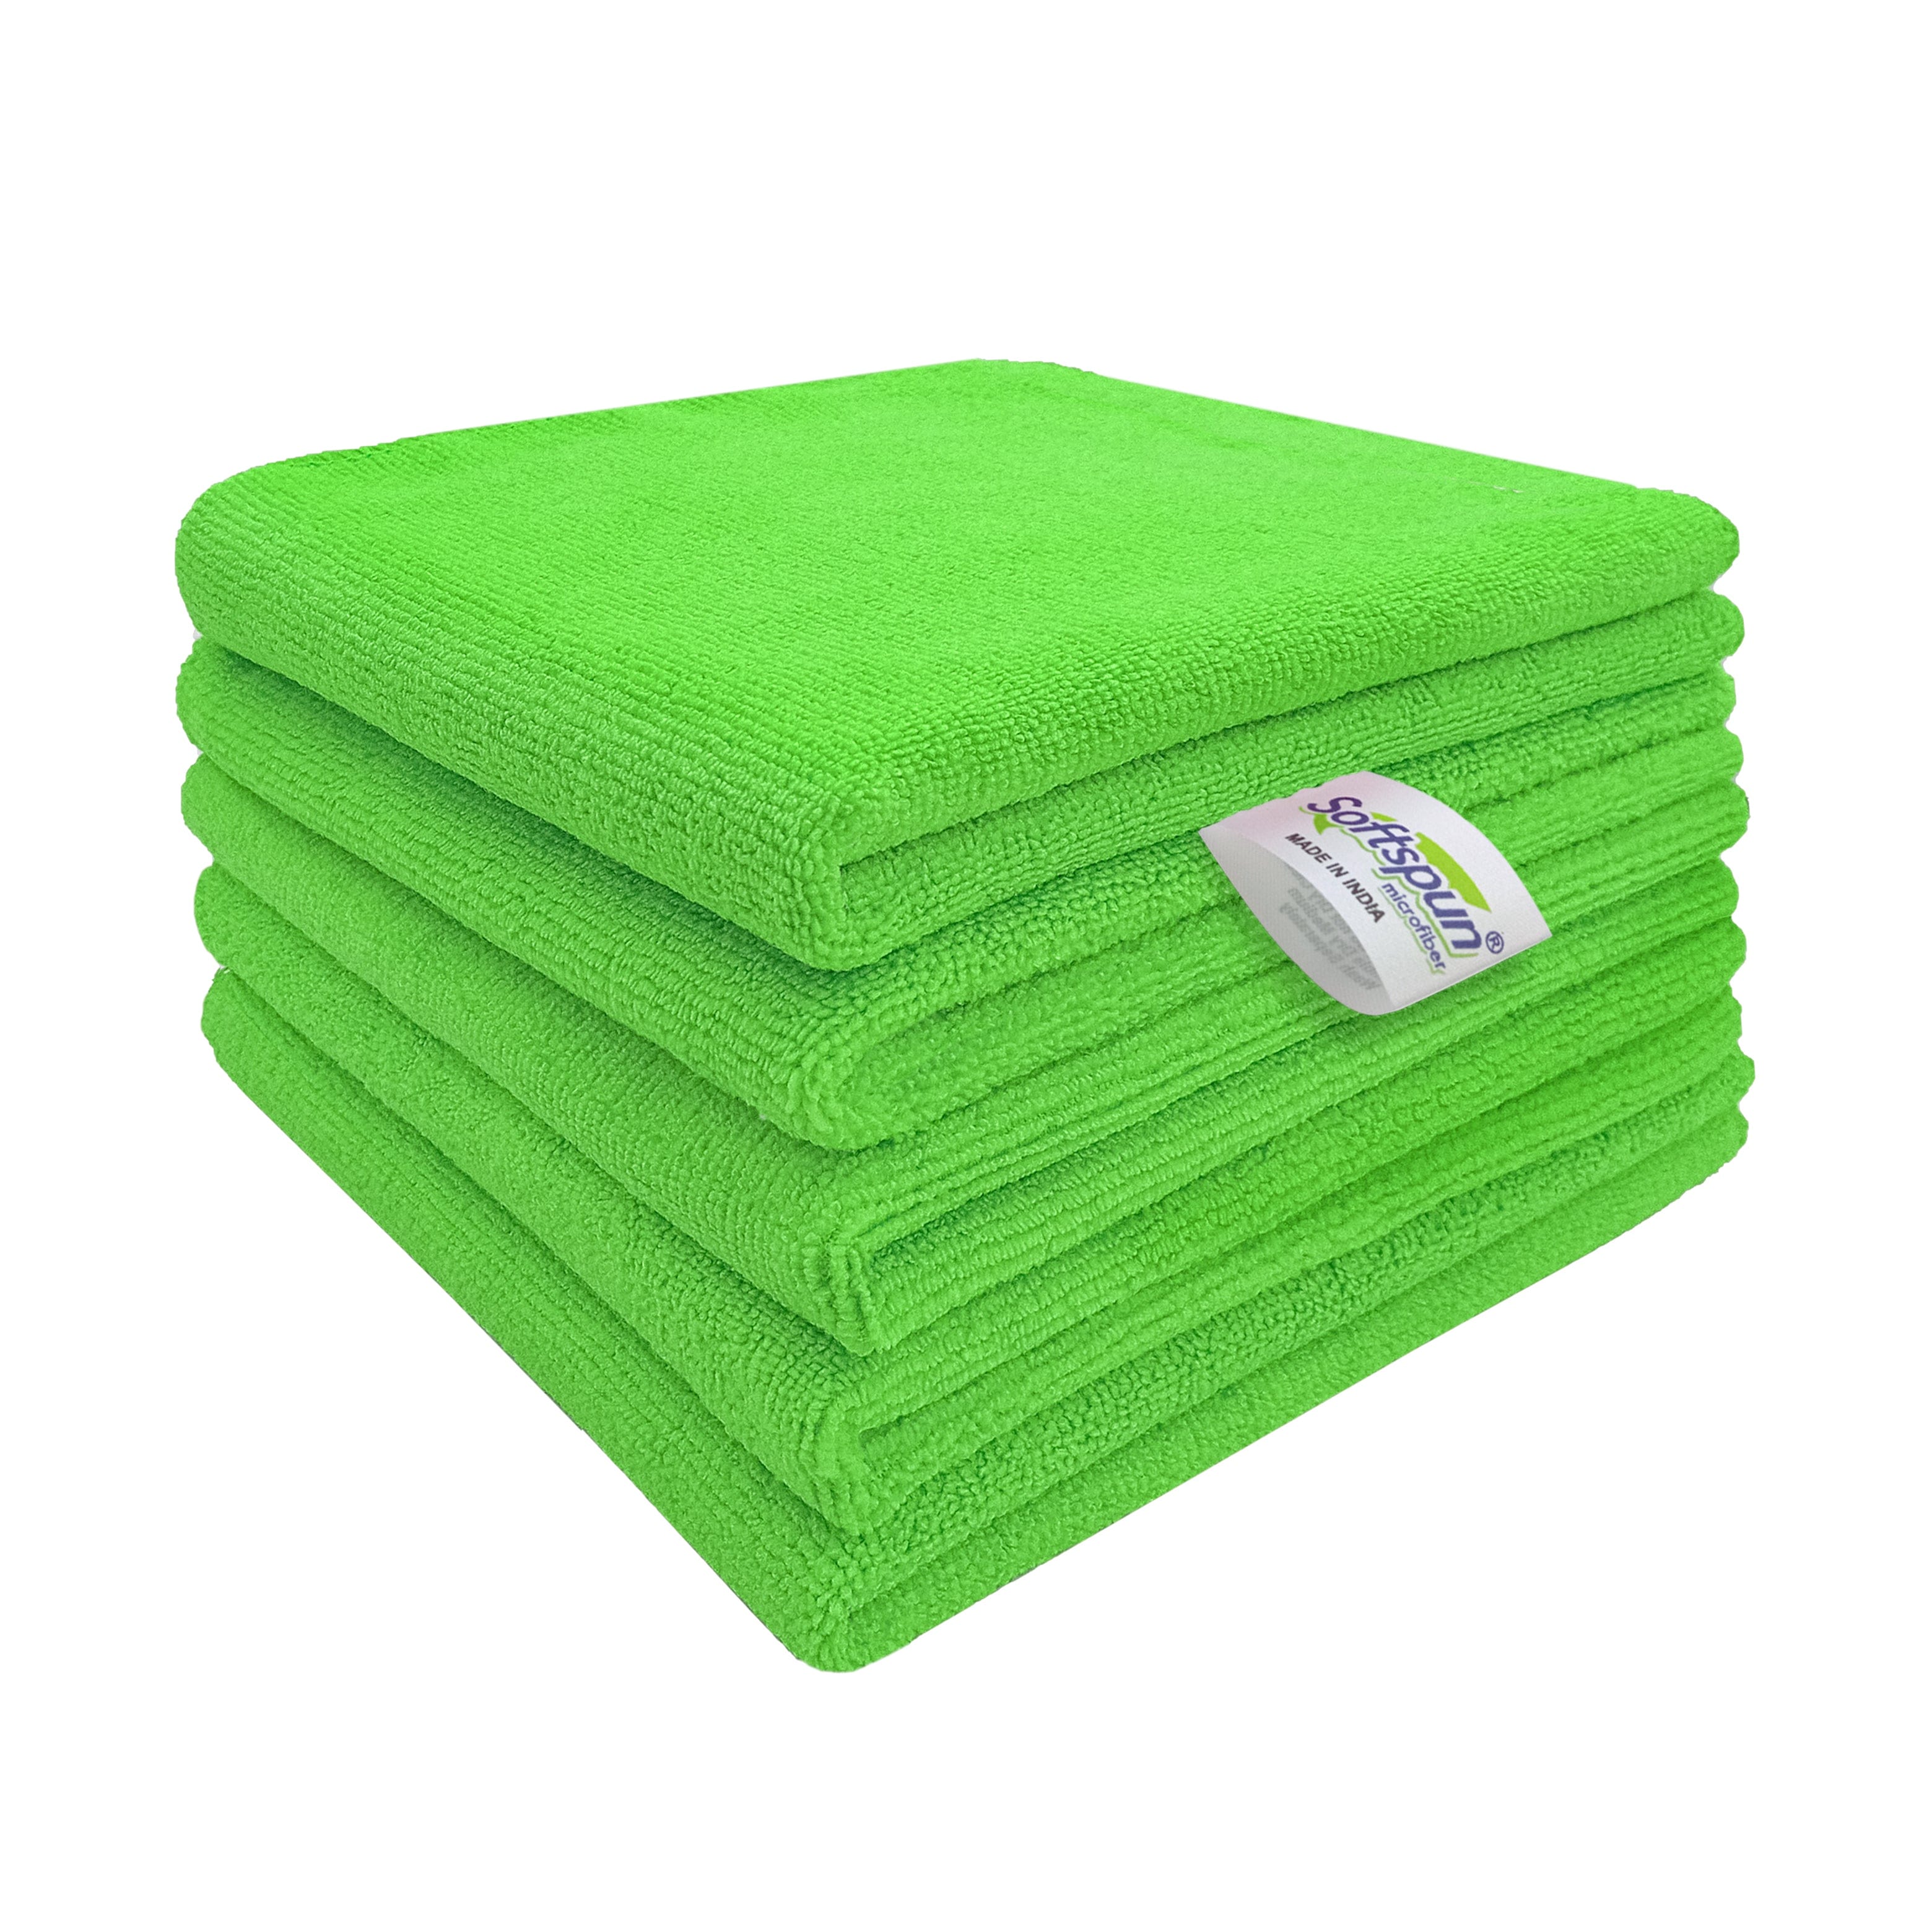 Buy SOBBY 4 pcs Premium Microfiber Cleaning Cloths - Highly Absorbent, Lint  Free, Streak Free, Micro Fiber Cleaning Towels, Dish Cloth, Wash Clothes,  Size: 40 x 40 CM - Especially for Kitchen